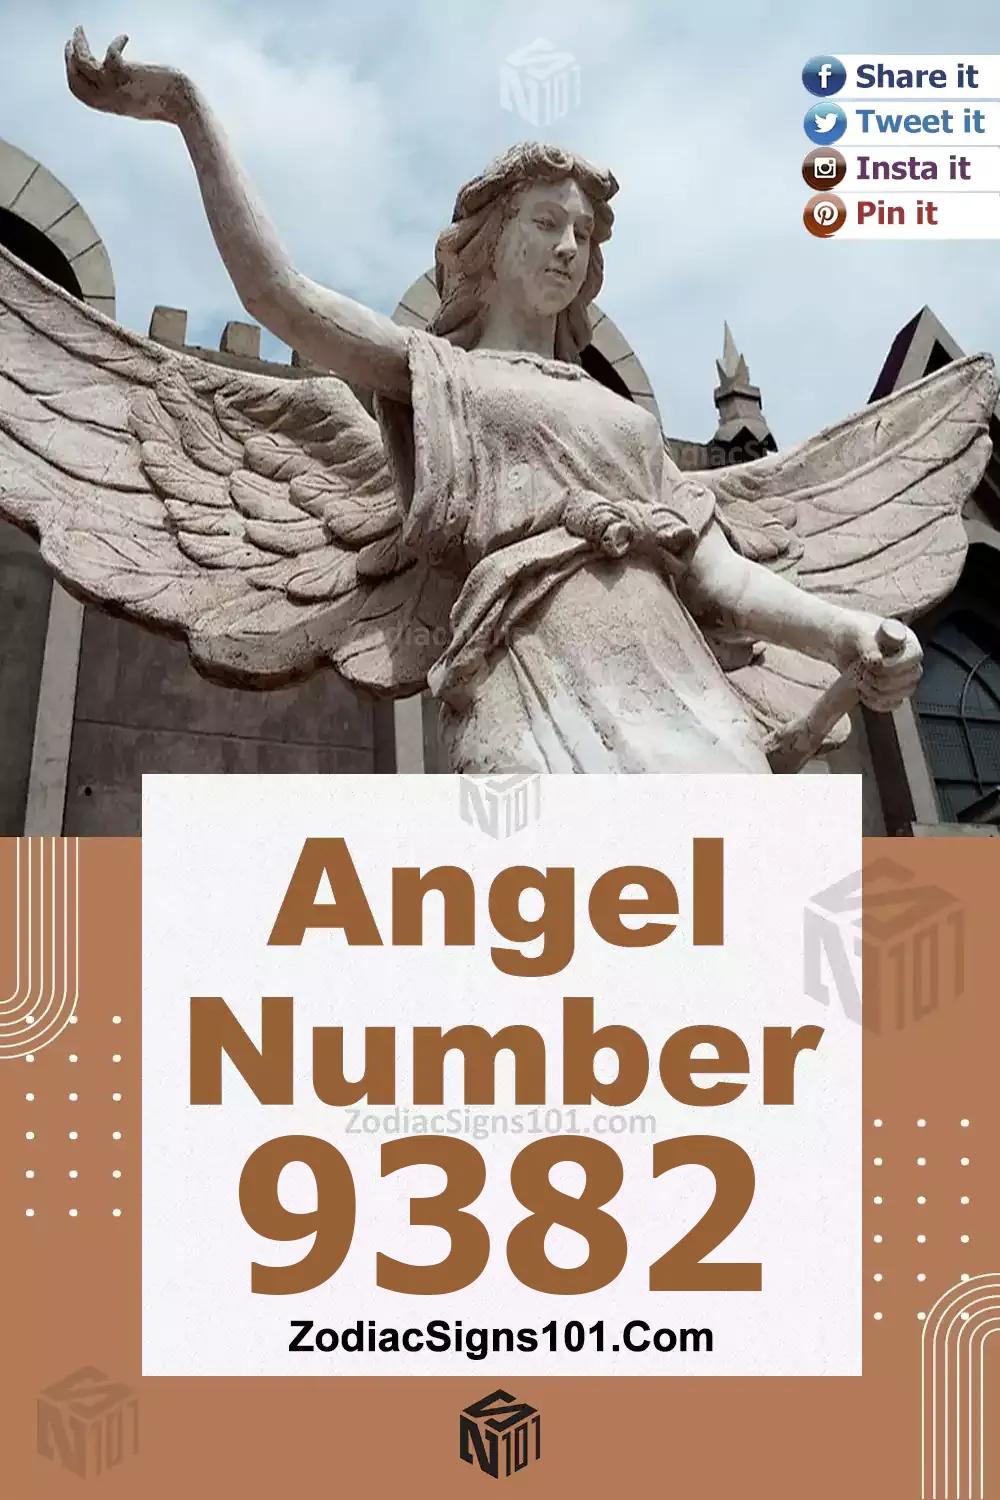 9382 Angel Number Meaning